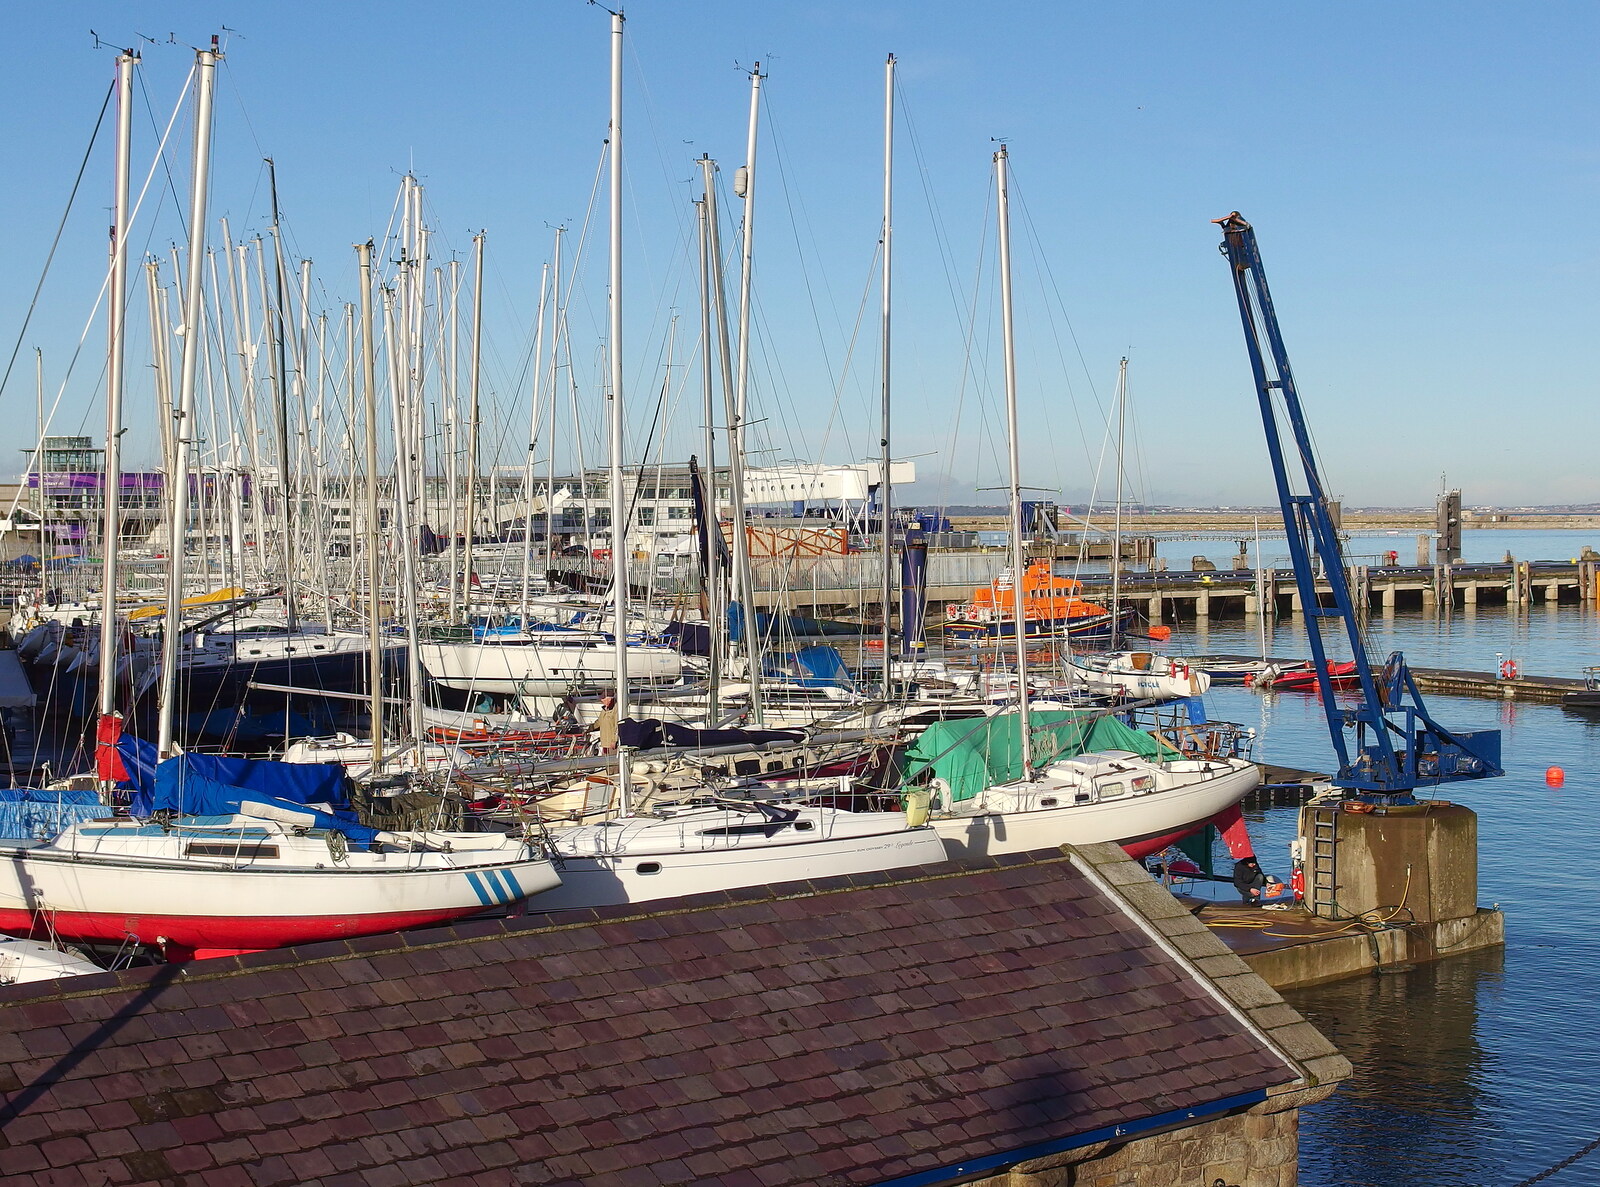 Boats in the harbour from Dun Laoghaire and an Electrical Disaster, Monkstown, County Dublin, Ireland - 4th January 2014